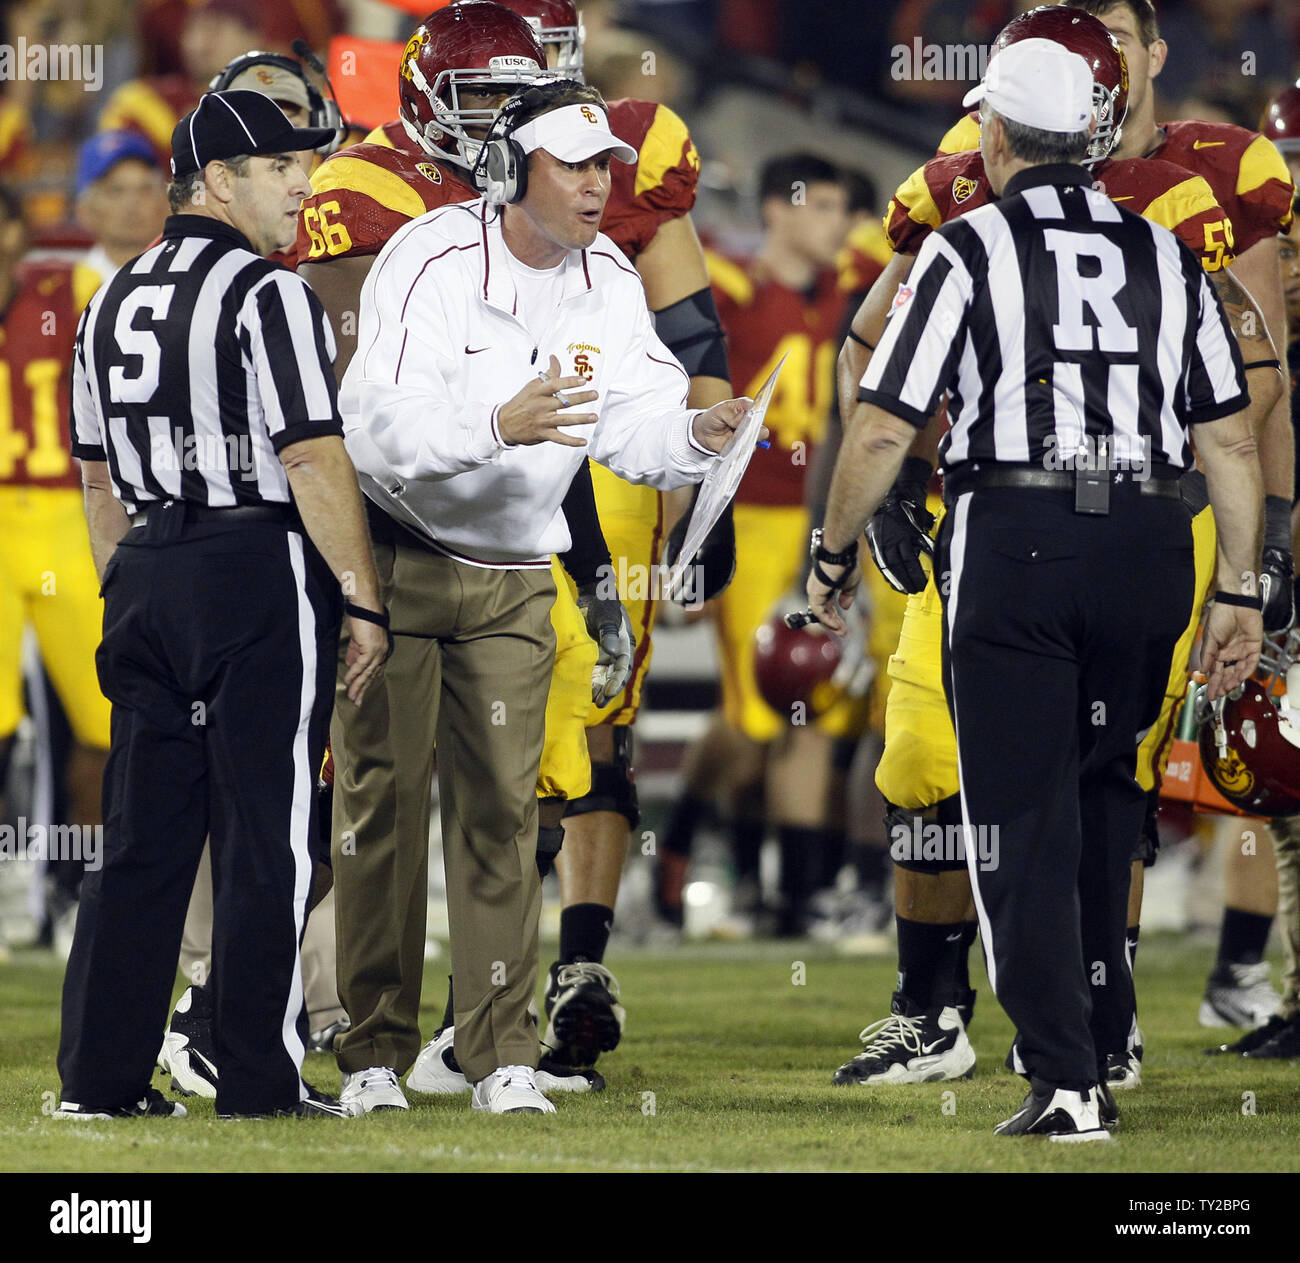 USC Lane Kiffin argues with the referees at the end of regulation against Stanford at the Coliseum in Los Angeles on October 29, 2011. Stanford won 56-48. UPI/Lori Shepler Stock Photo